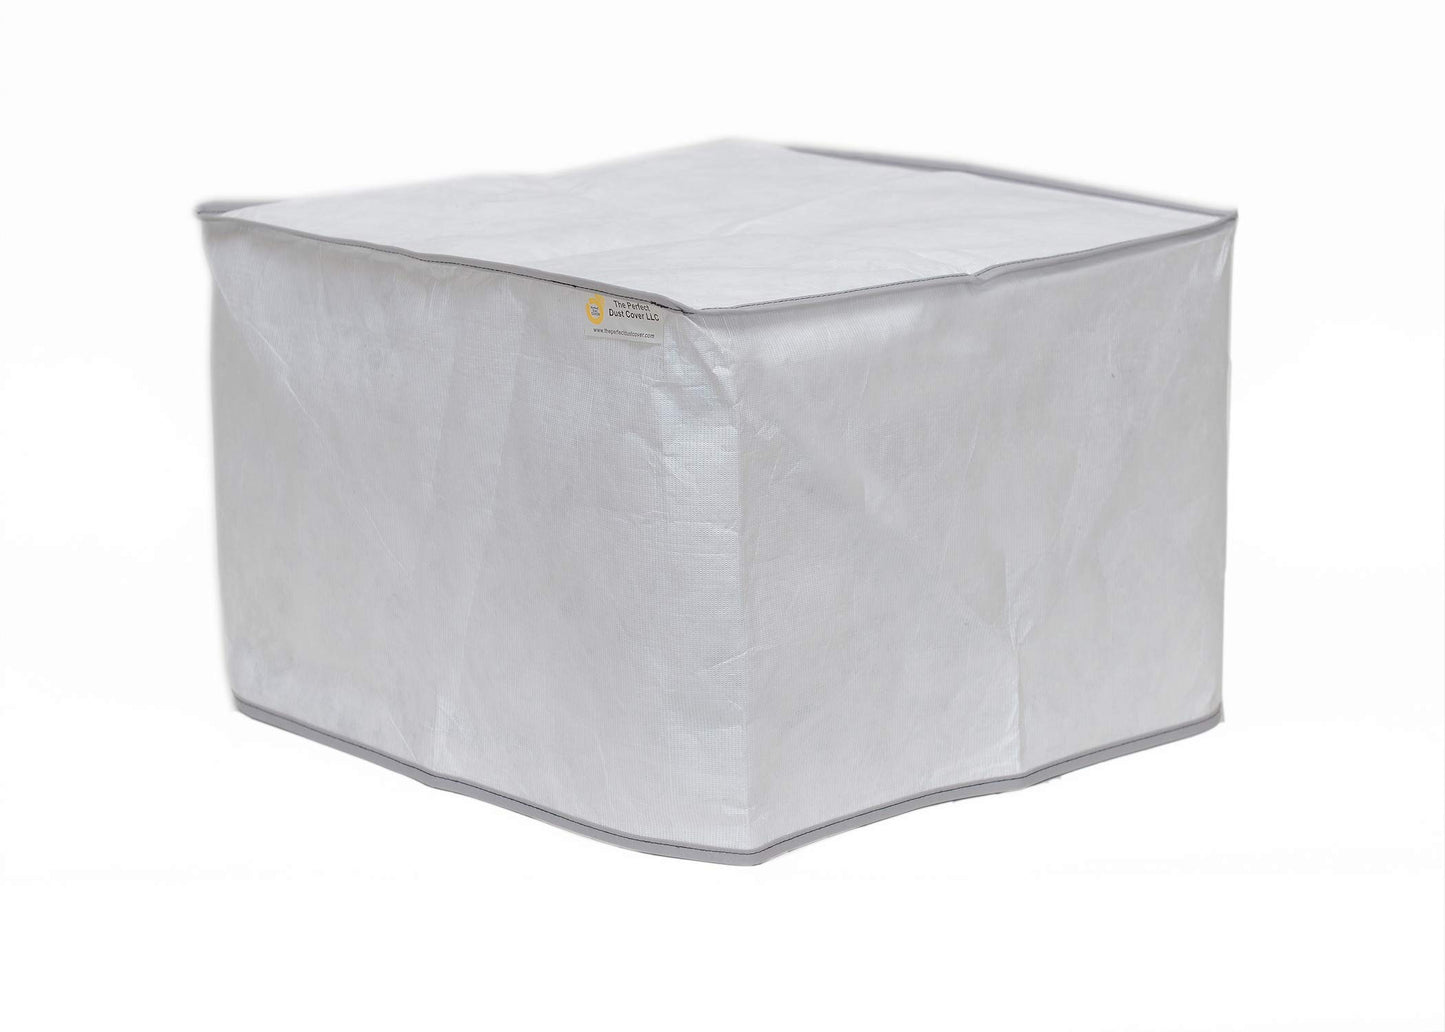 The Perfect Dust Cover, White Vinyl Cover for HP Laserjet Pro MFP M477fdw Laser Printer, Anti Static and Waterproof Cover Dimensions 16.4''W x 18.6''D x 15.4''H by The Perfect Dust Cover LLC